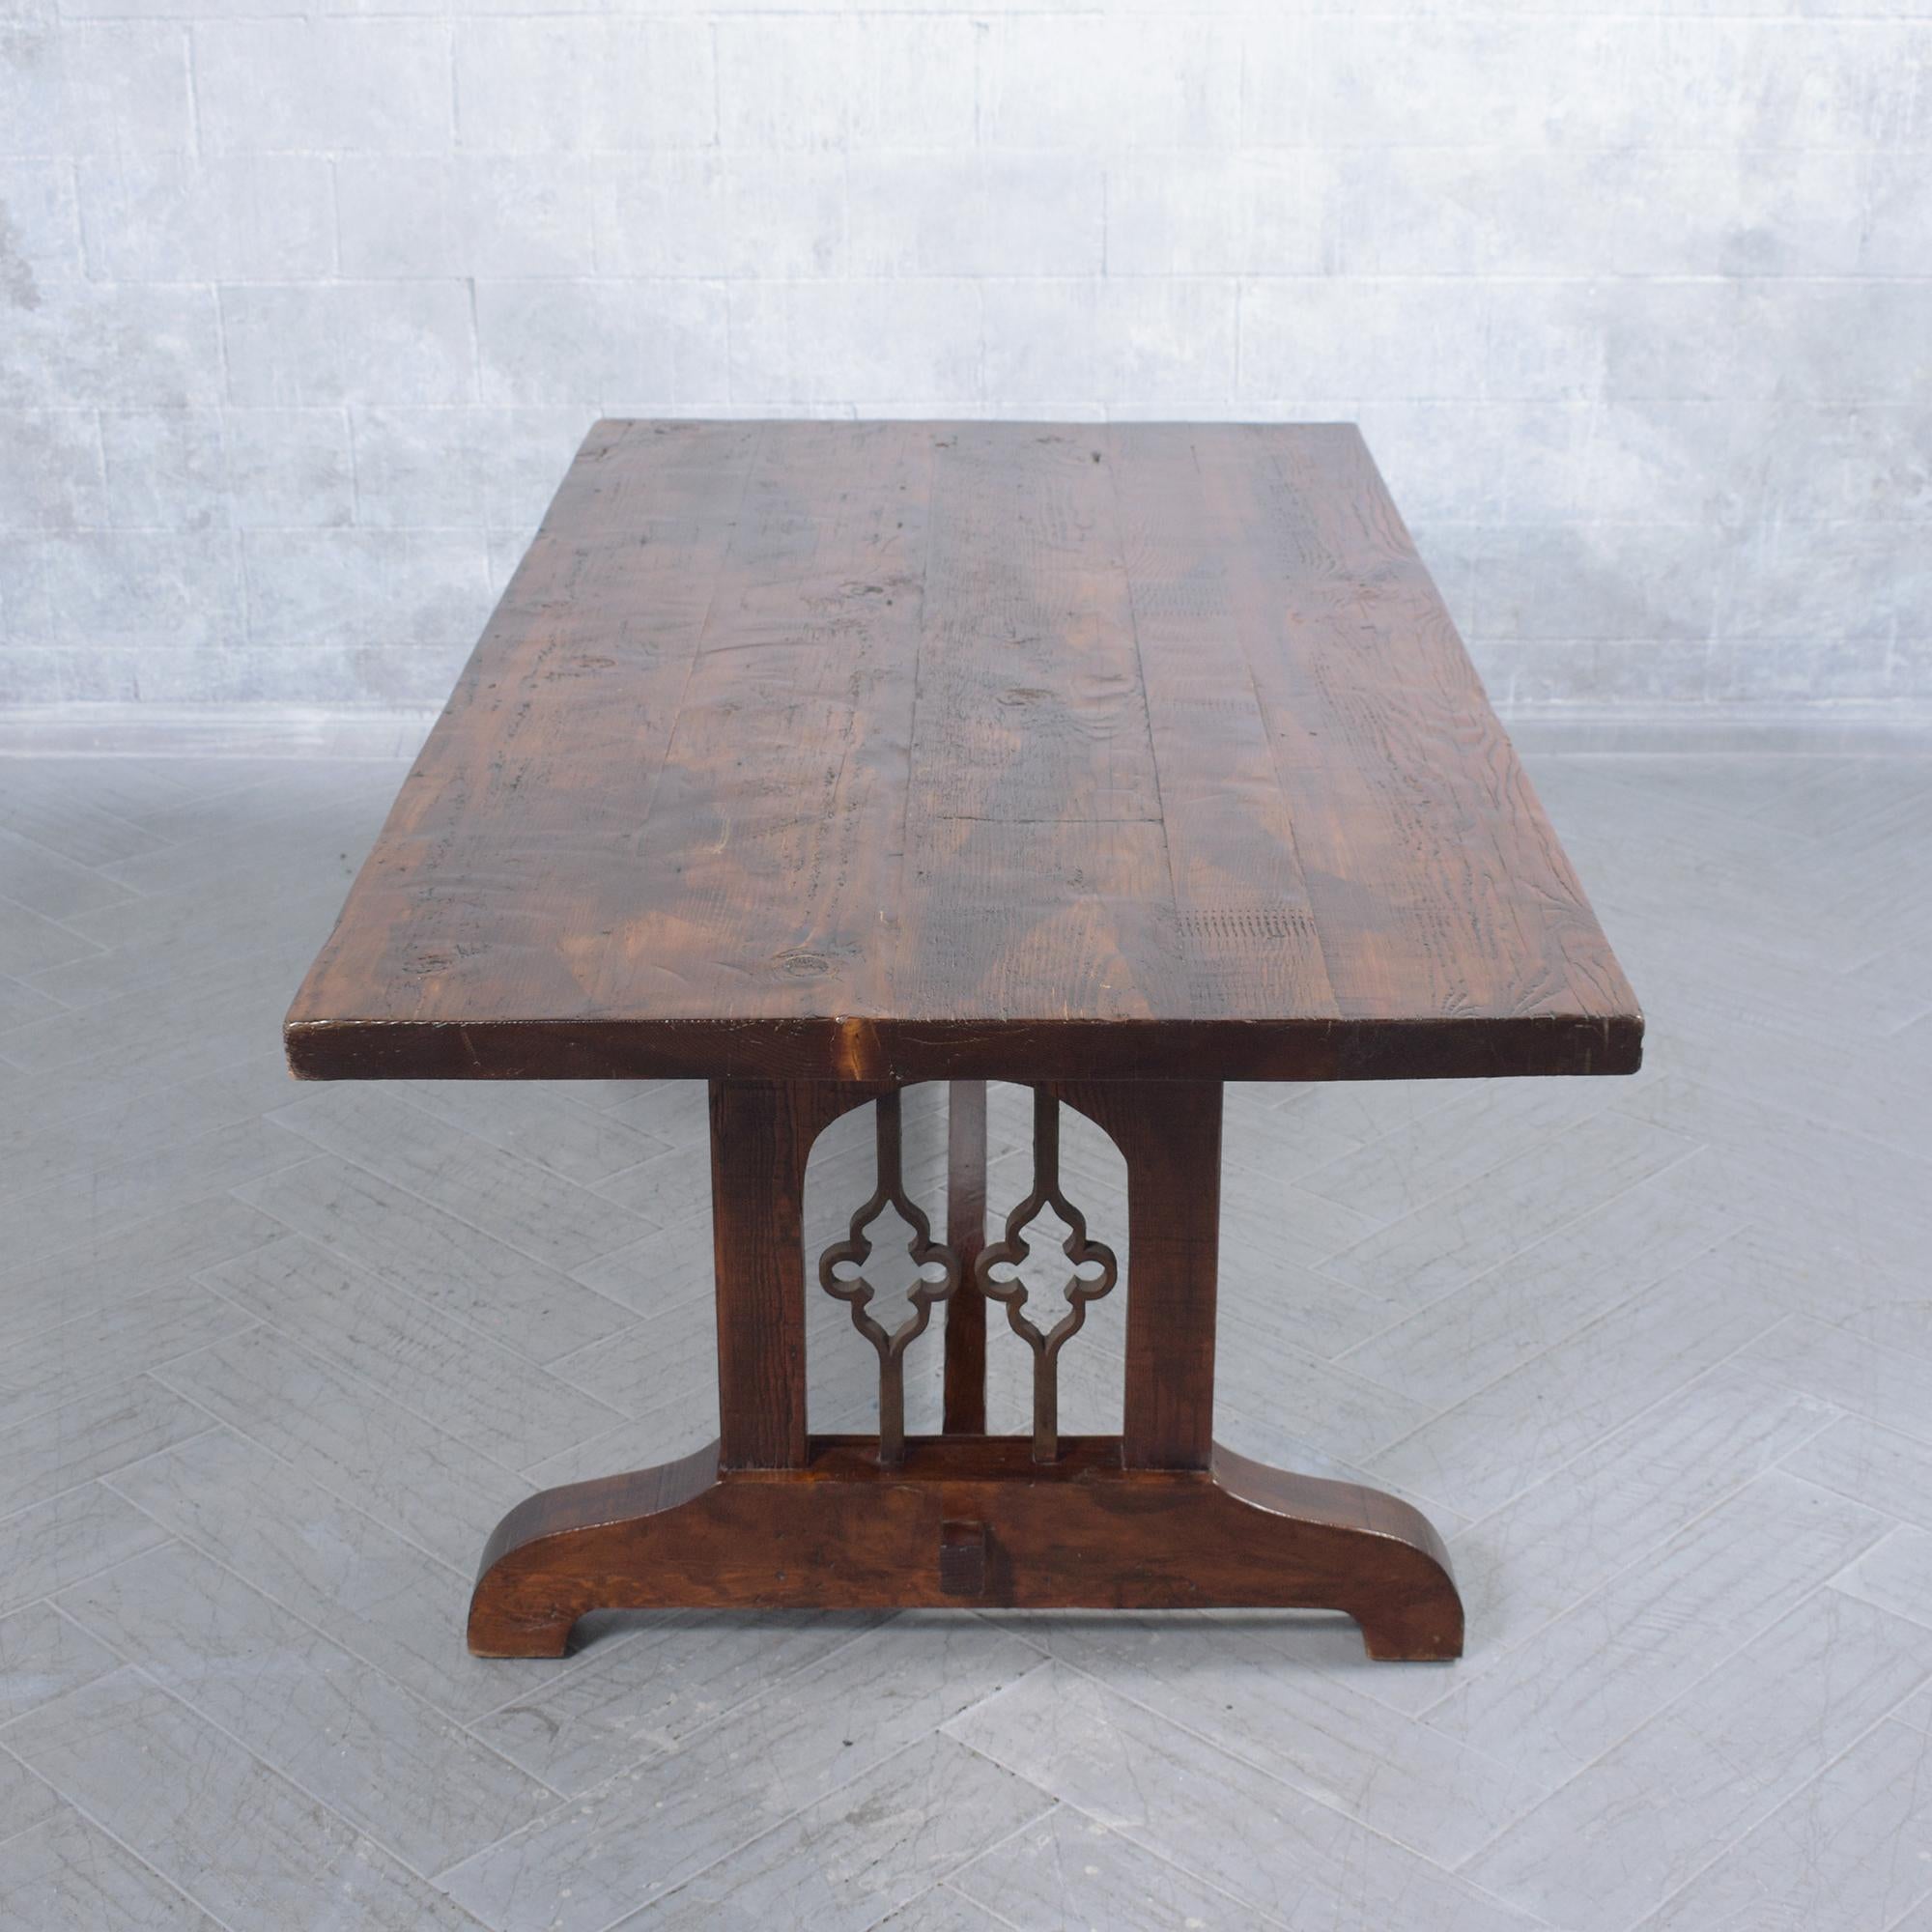 Vintage Solid Wood Dining Table with Iron Accents and Pedestal Legs For Sale 5